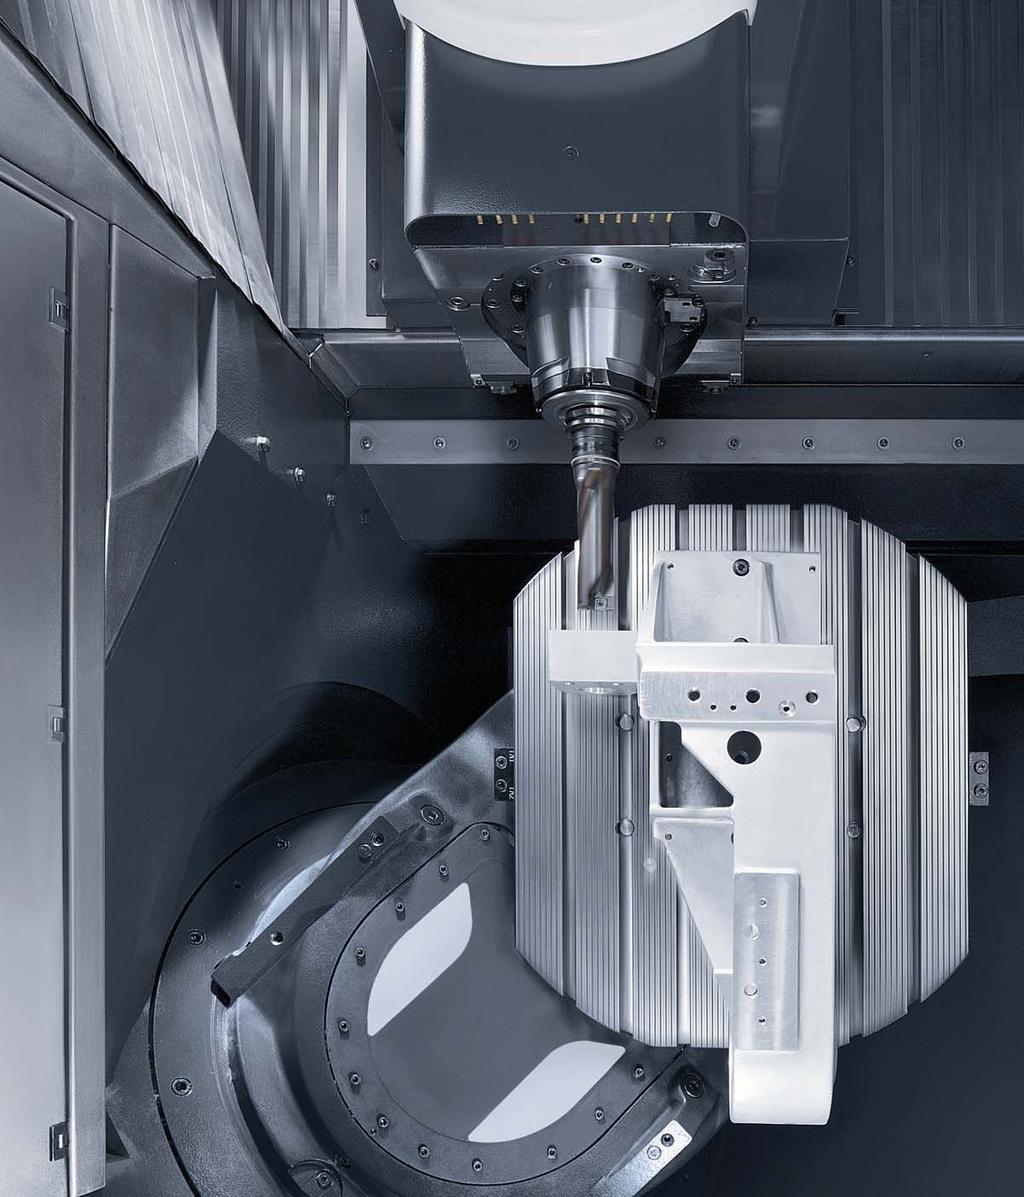 Simultaneous 5-axis machining The highly dynamic swivel rotary table enables simultaneous